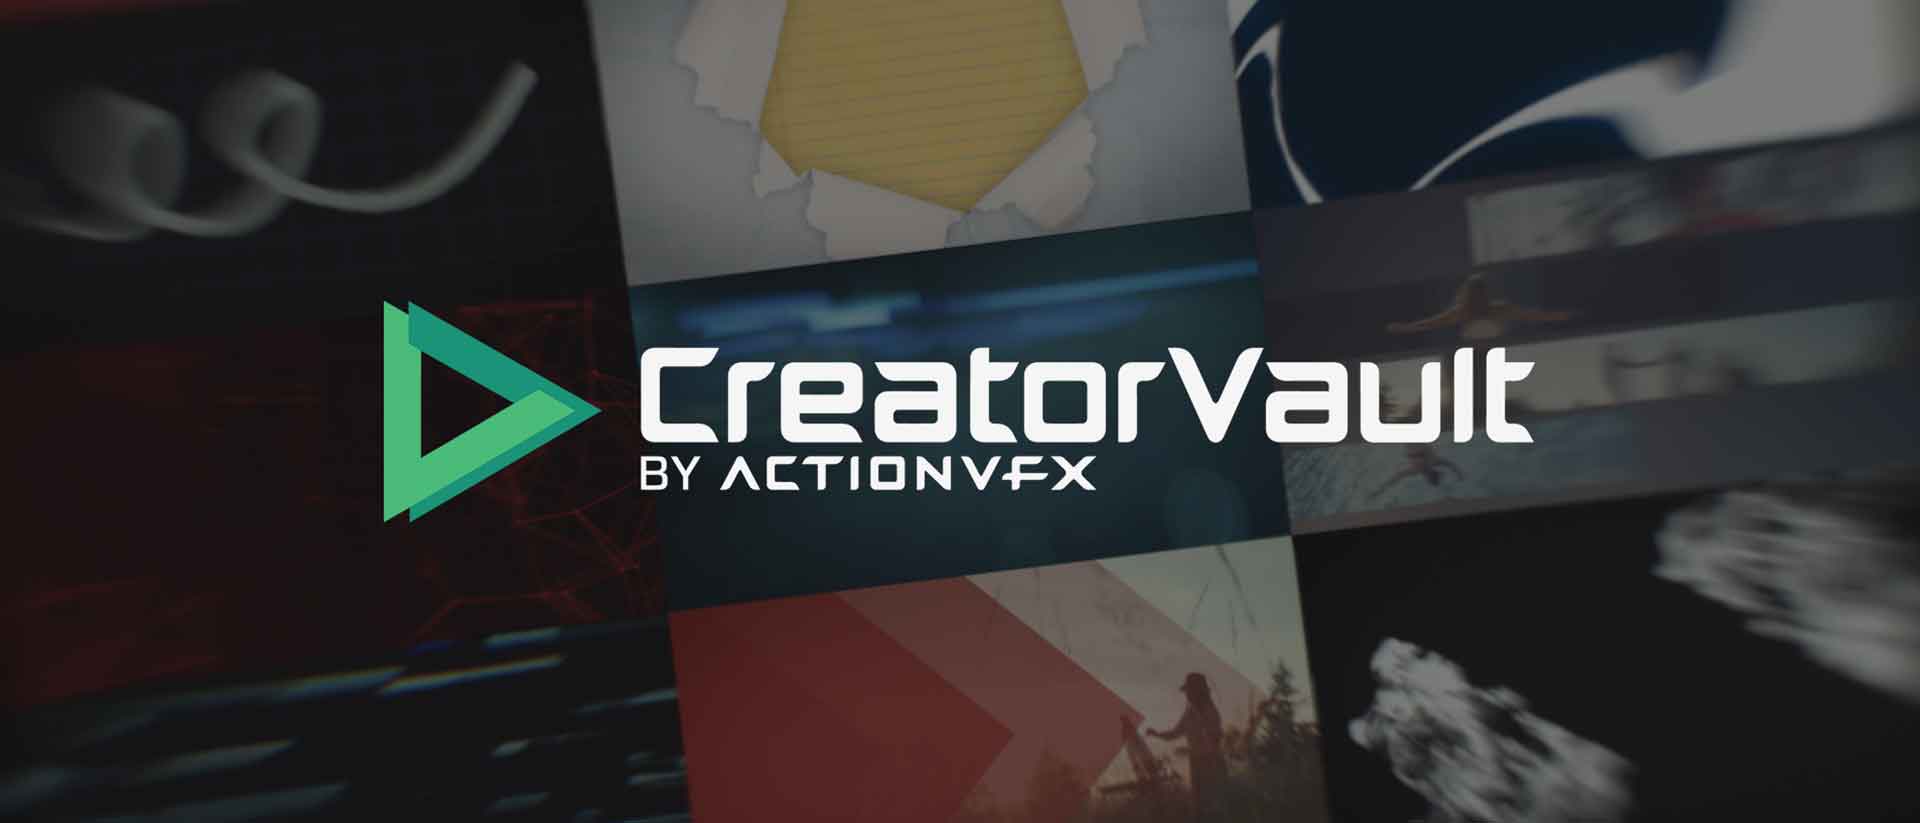 ActionVFX Has Launched CreatorVault.com: Curated Stock Elements For Video Creators